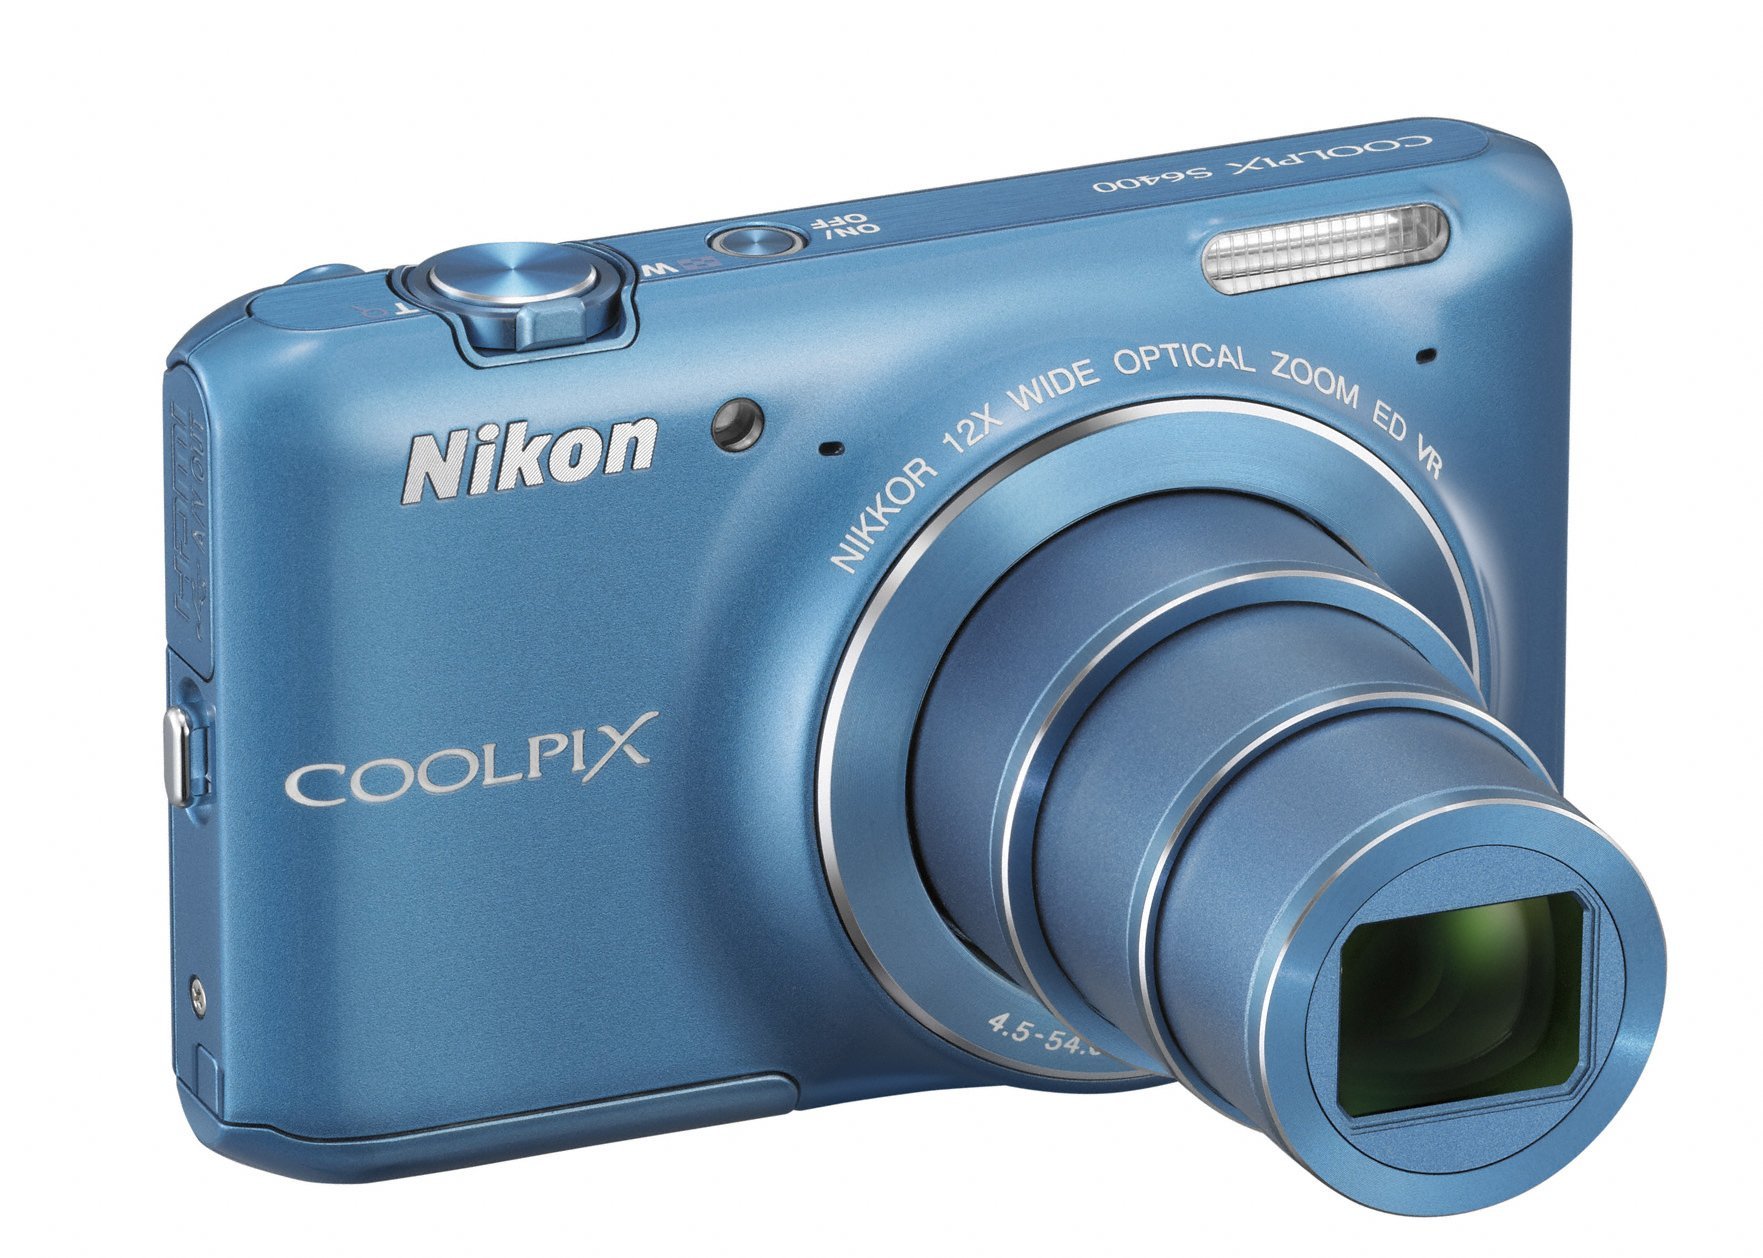 Nikon COOLPIX S6400 16 MP Digital Camera with 12x Optical Zoom and 3-inch LCD (Blue)